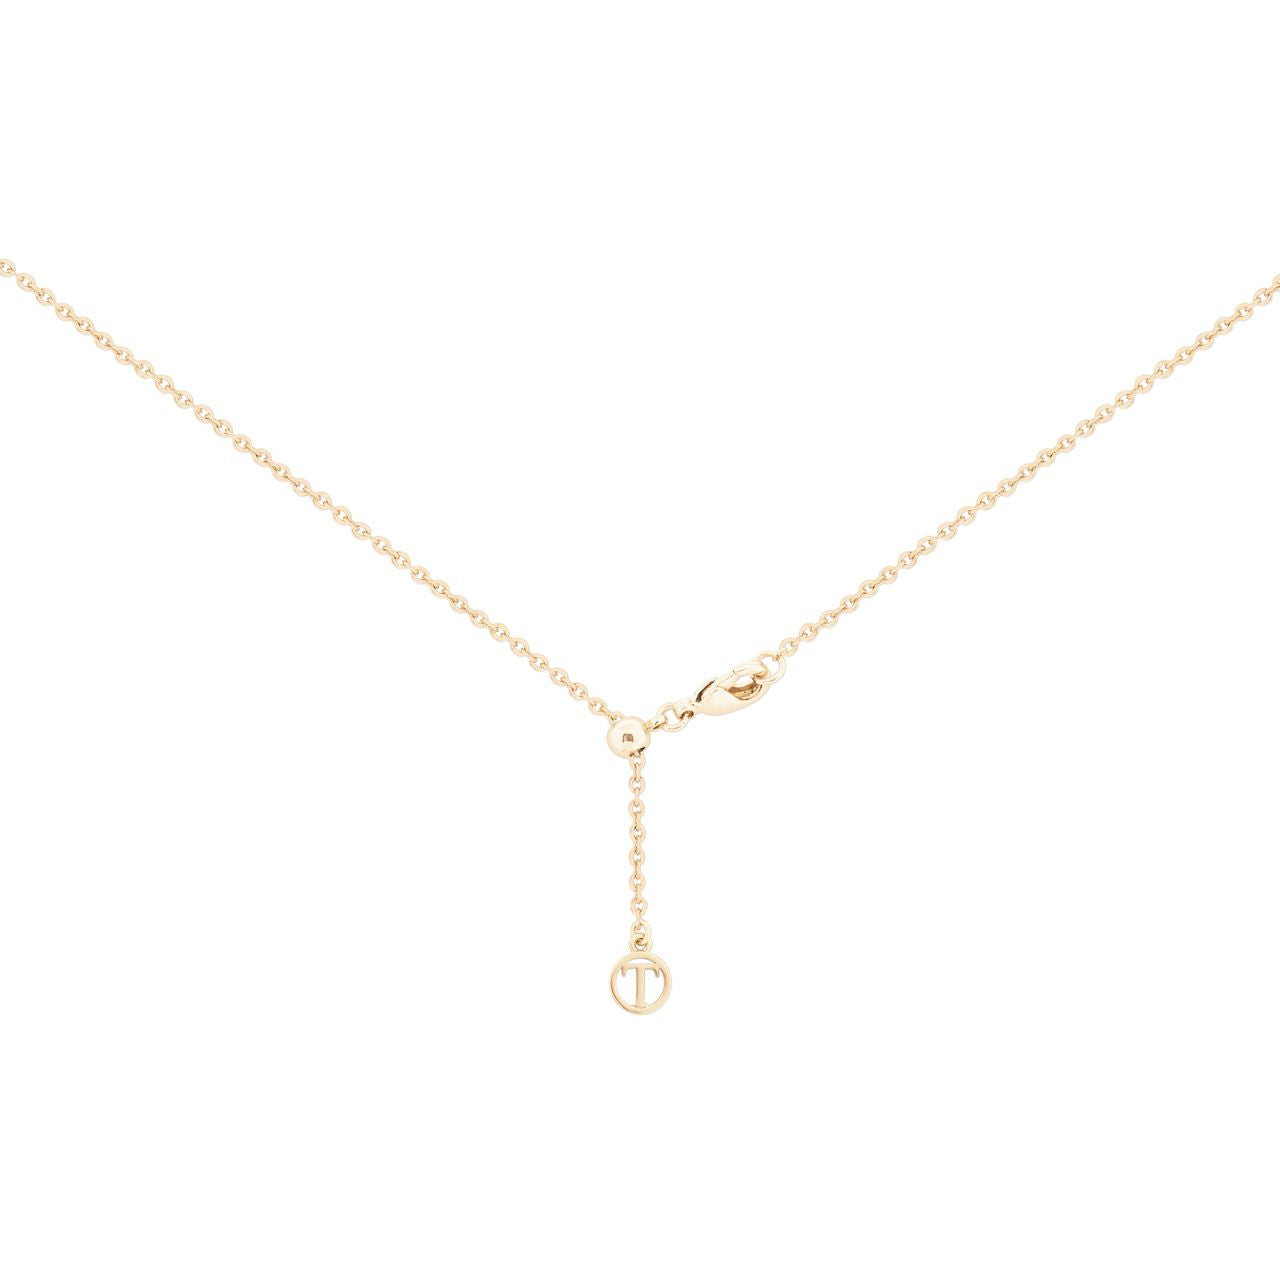 Introducing the NEW 2024 Gold Star Supernova Necklace by Tipperary. This elegant piece combines the timeless beauty of gold with a unique star design. As a product expert, we confidently offer this dazzling necklace as the perfect addition to any jewellery collection.